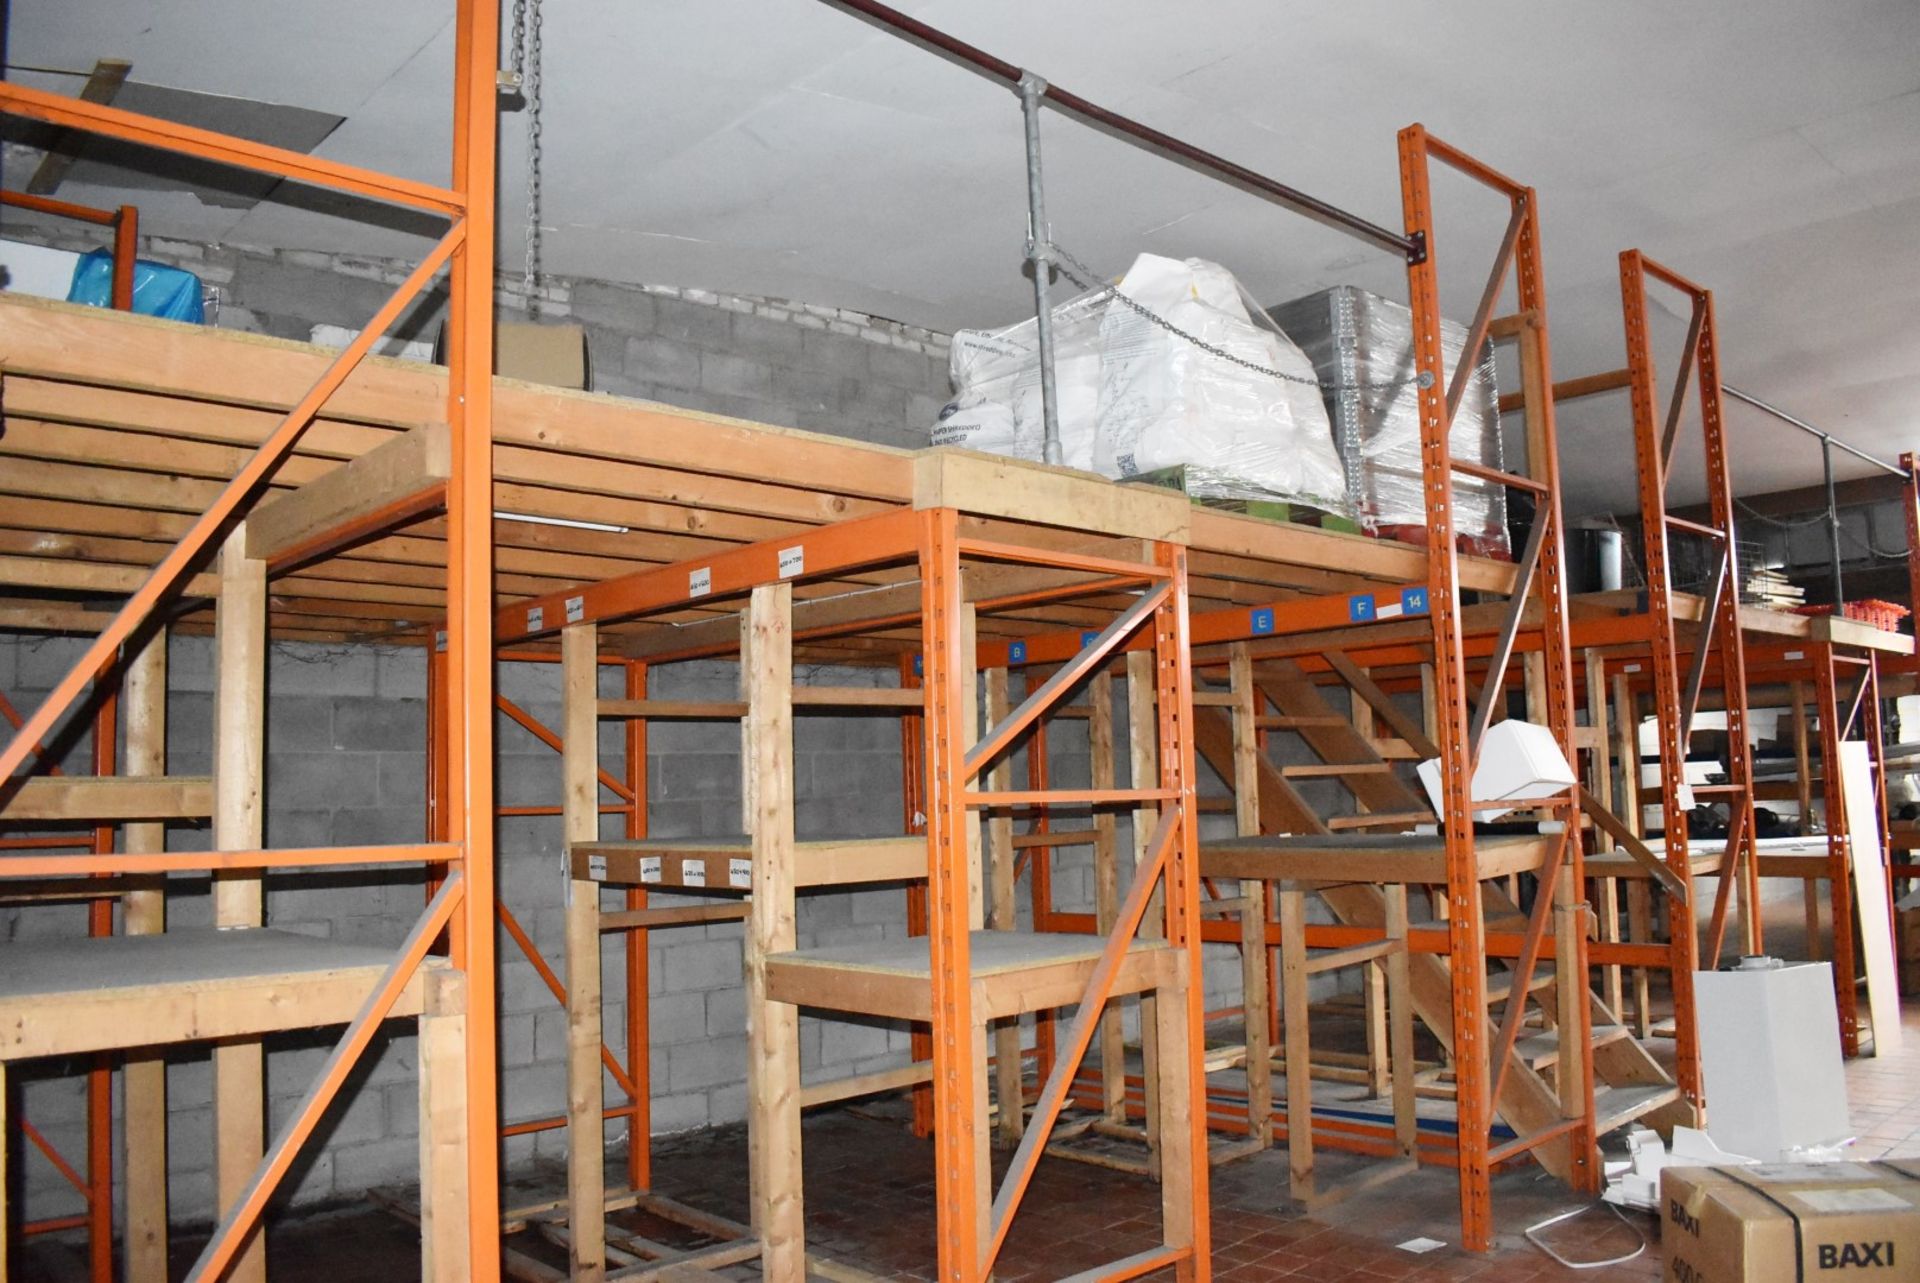 1 x Mezzanine Floor Construction of Steel Racking and Timber - Includes Staircase - Size: W11m x D3m - Image 5 of 18